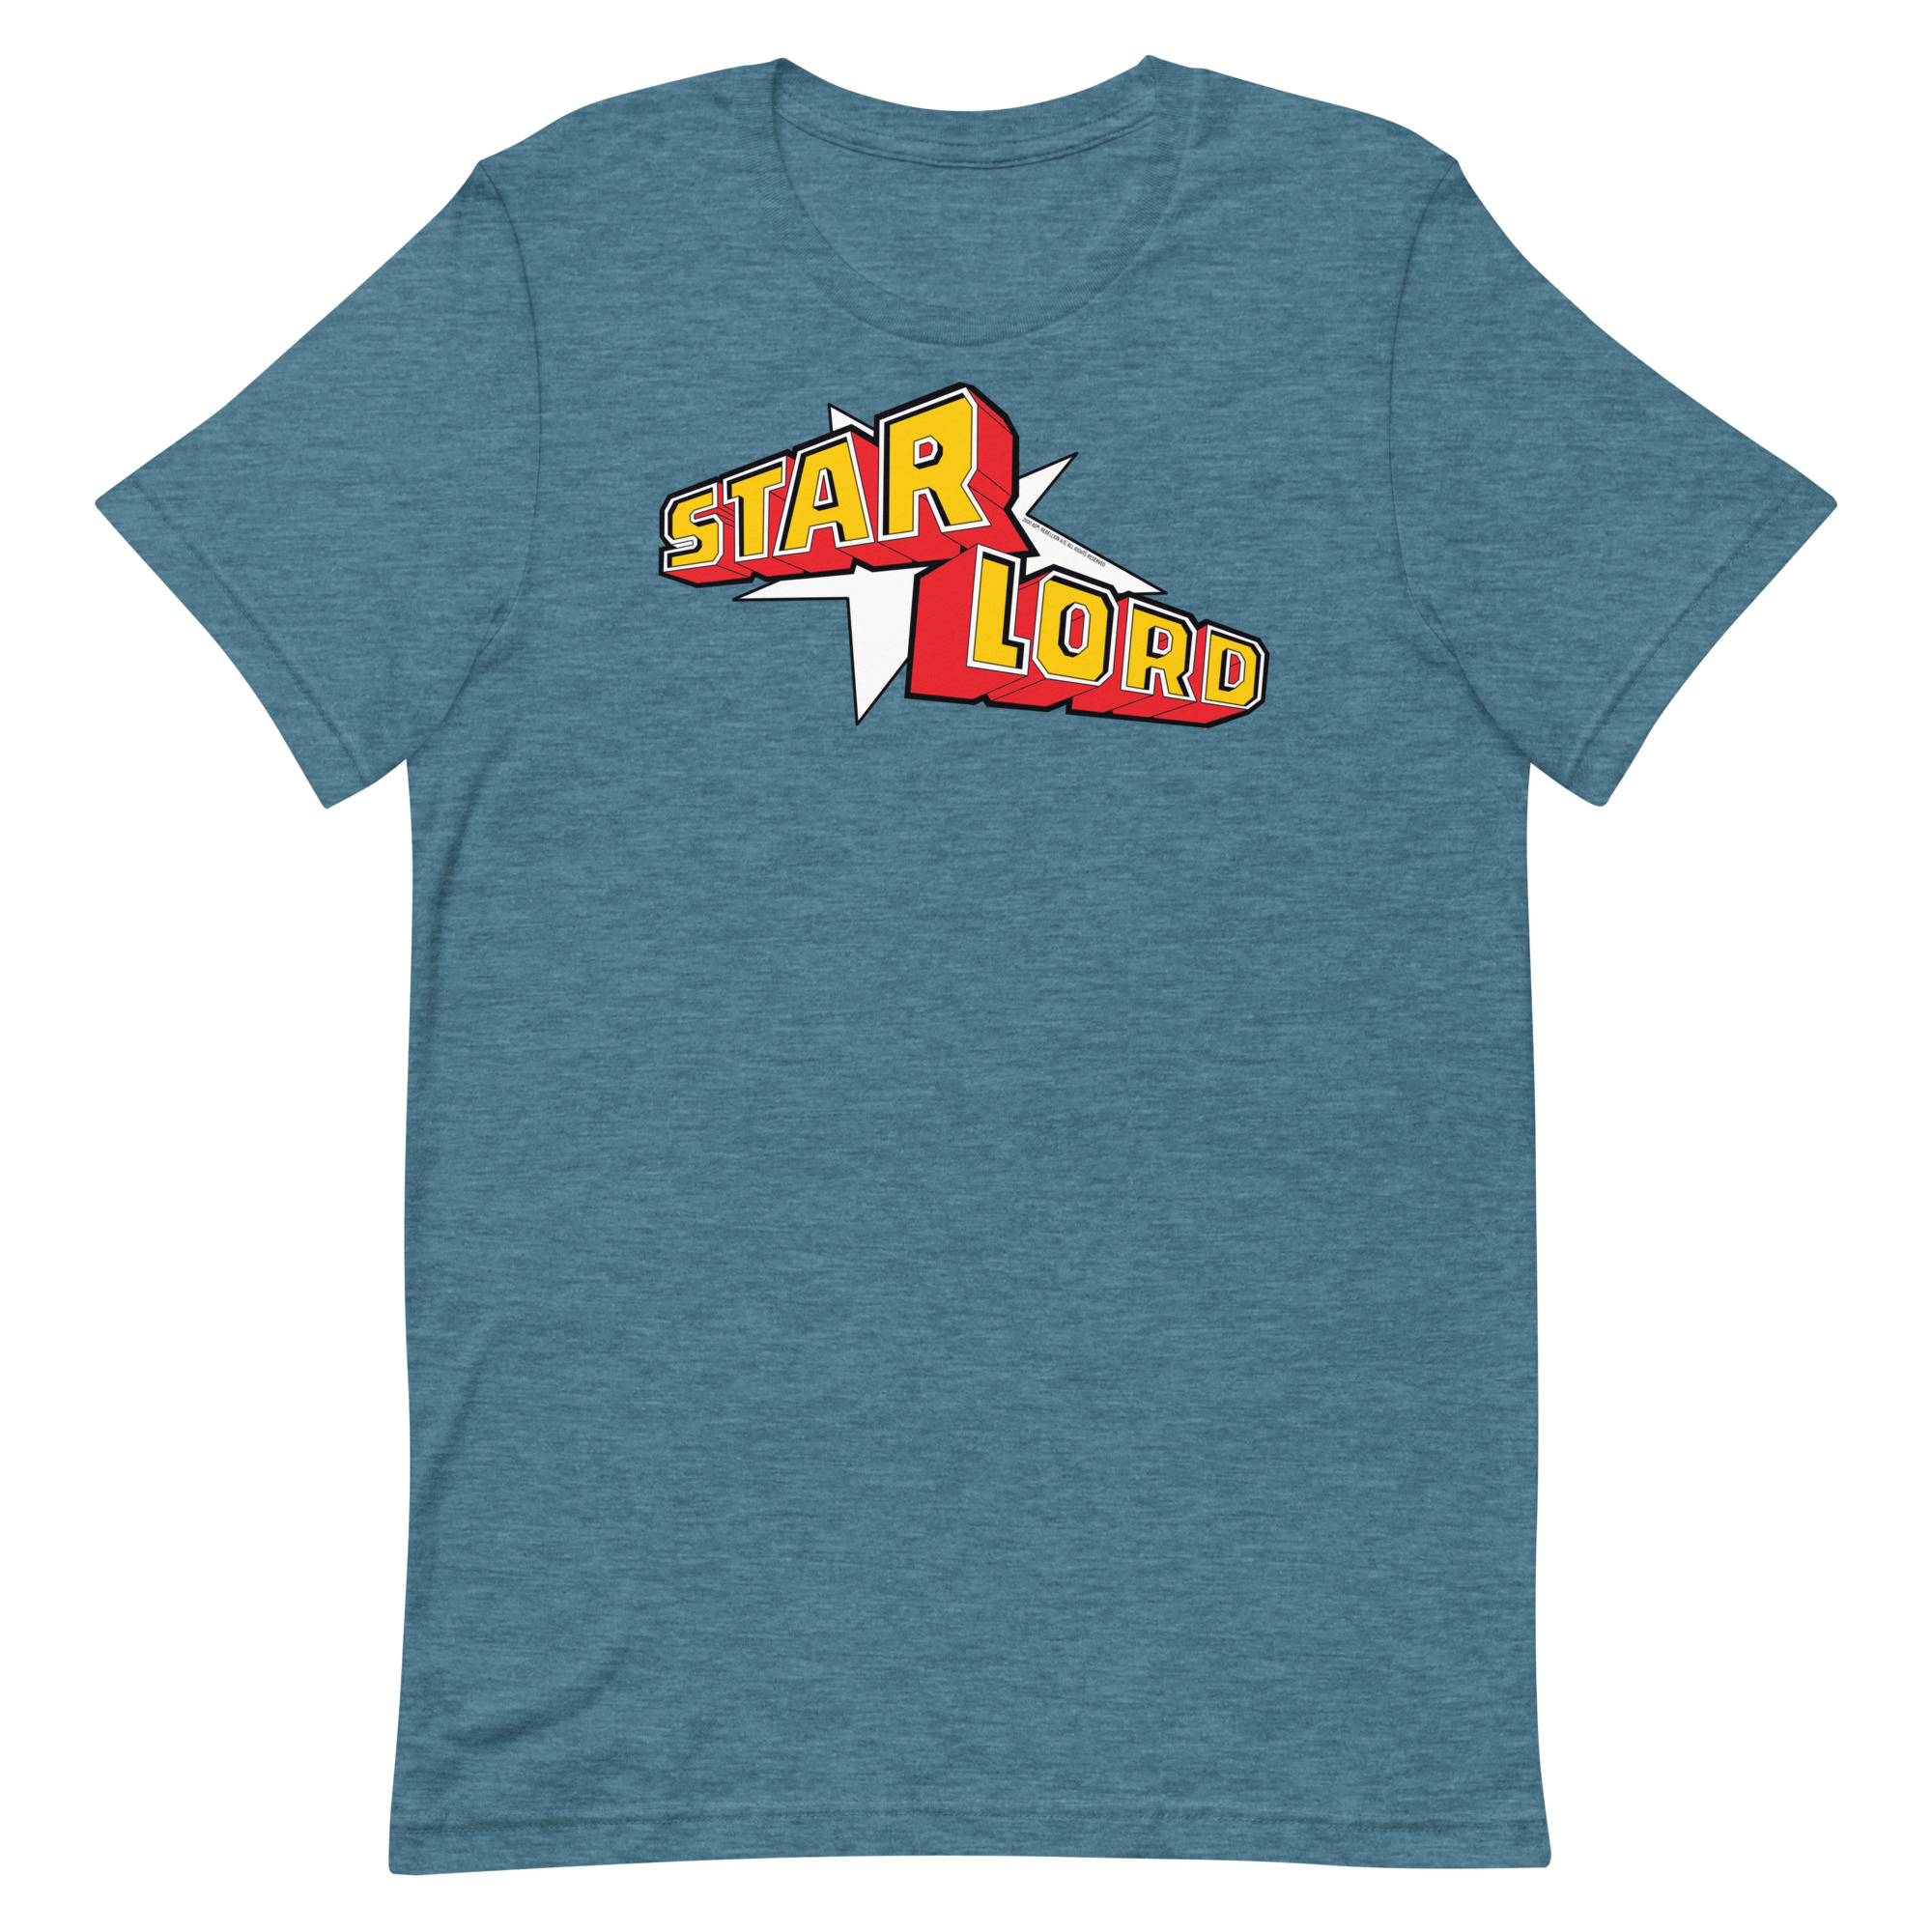 Image of a black coloured Star Lord t-shirt featuring a large Star Lord logo in the middle